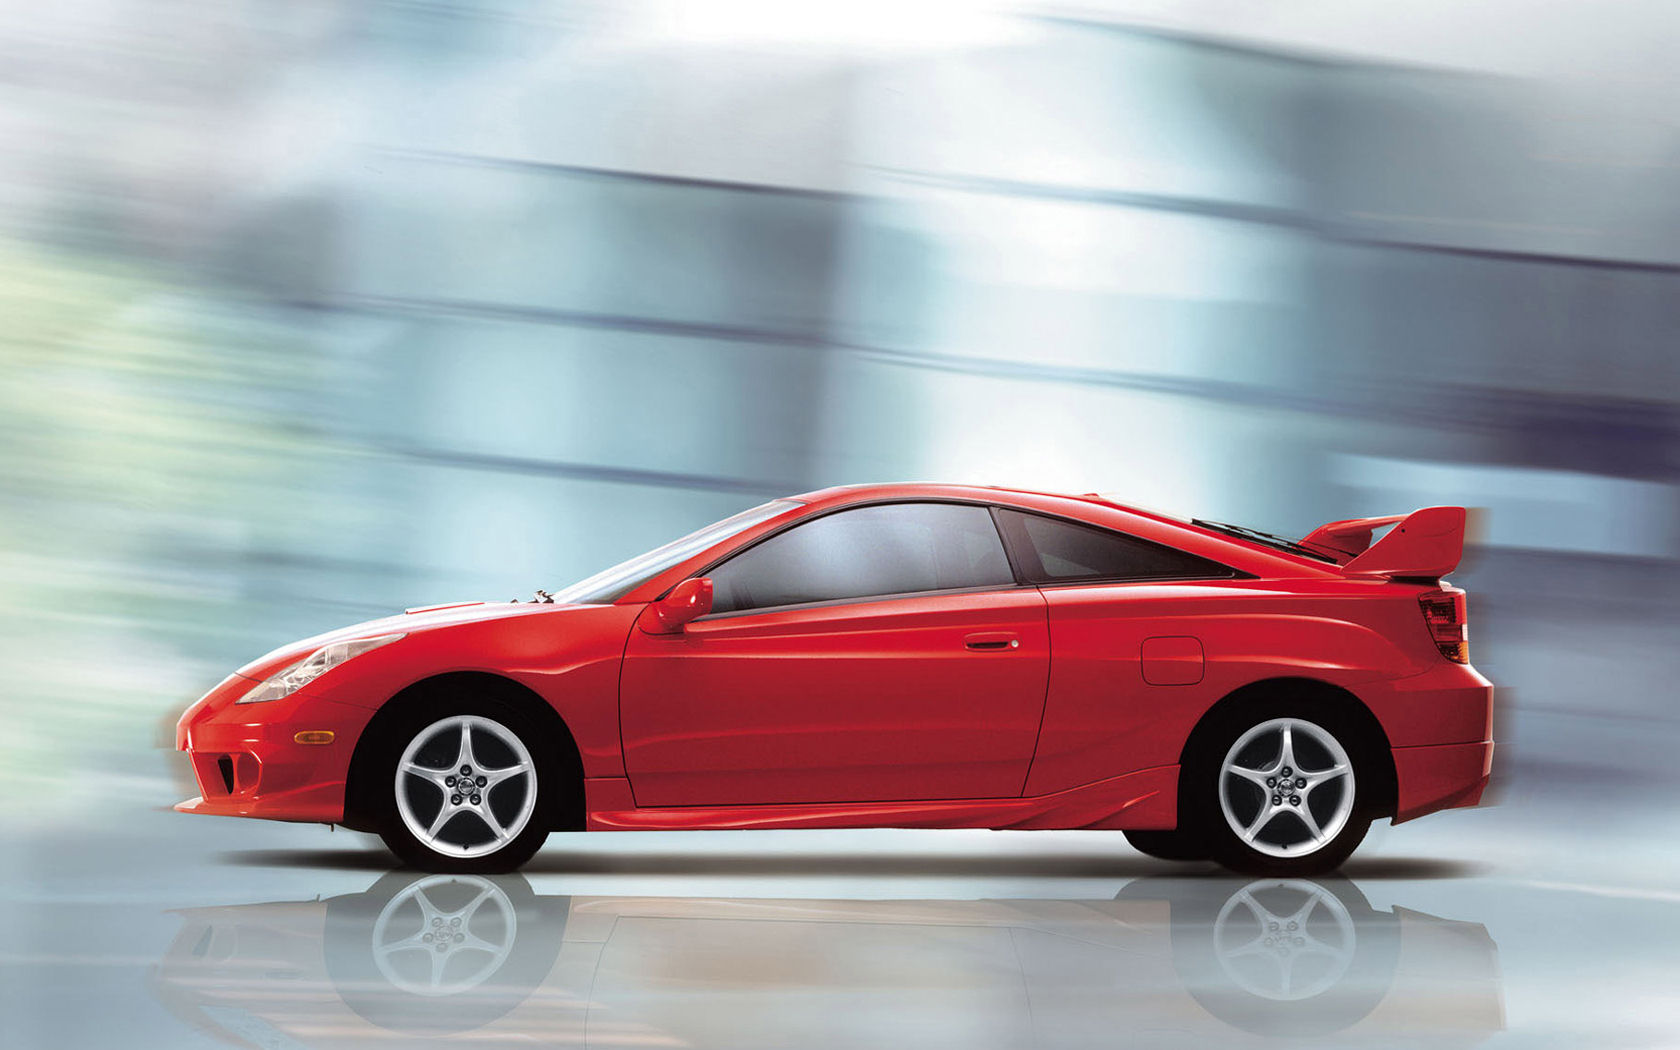 Classic red Toyota Celica parked in a scenic location, showcasing its iconic design and sporty allure.